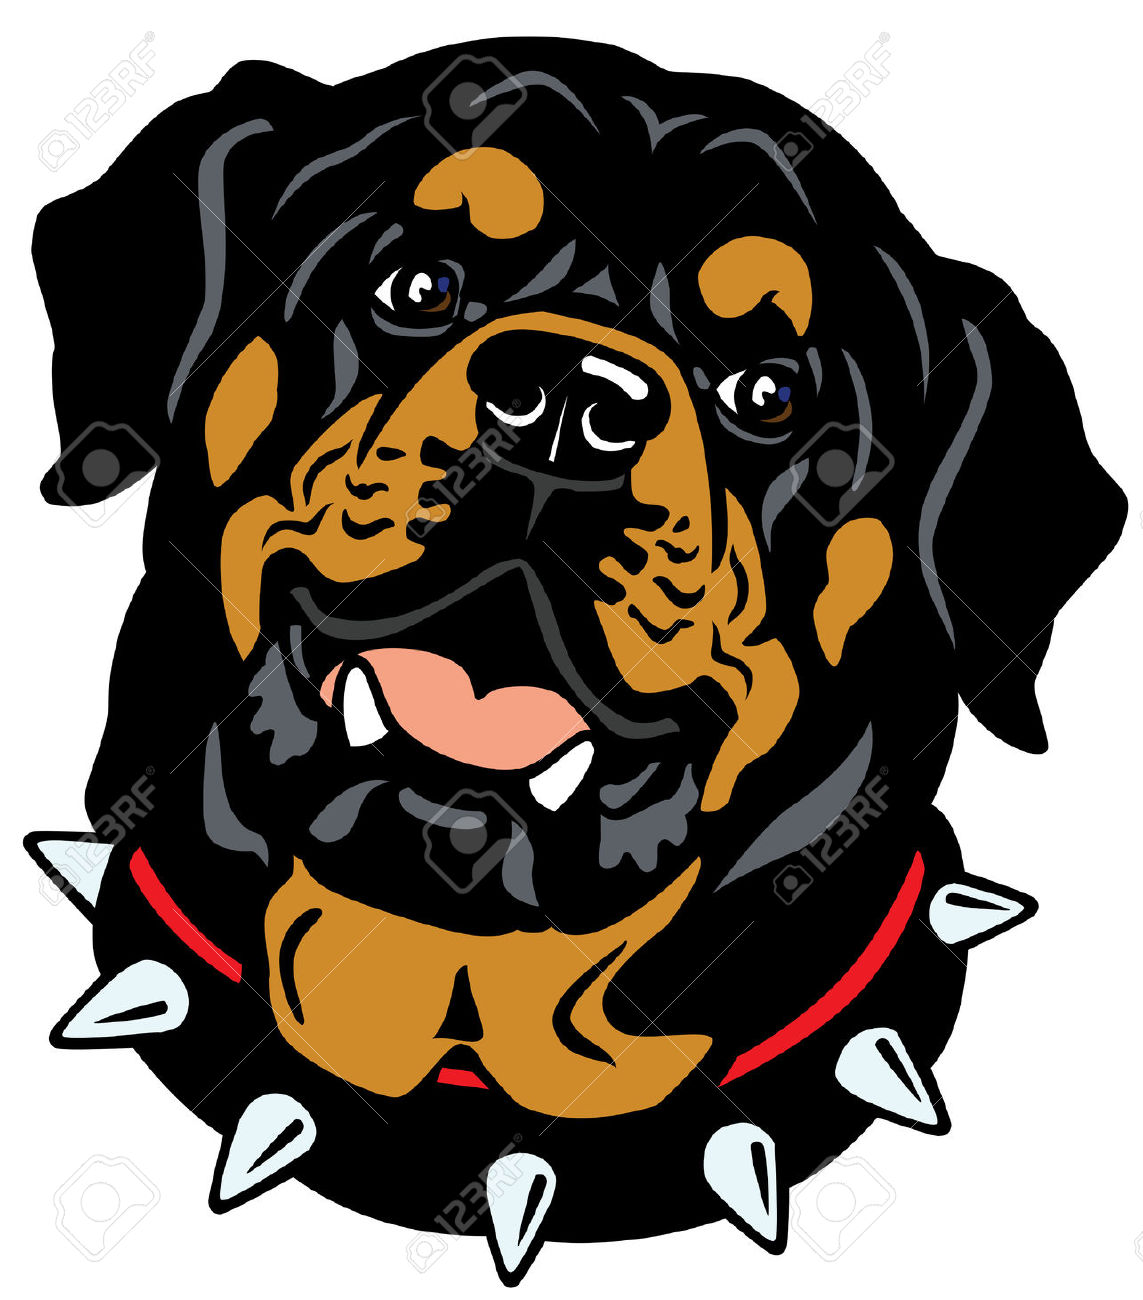 714 Rottweiler Cliparts, Stock Vector And Royalty Free Rottweiler.